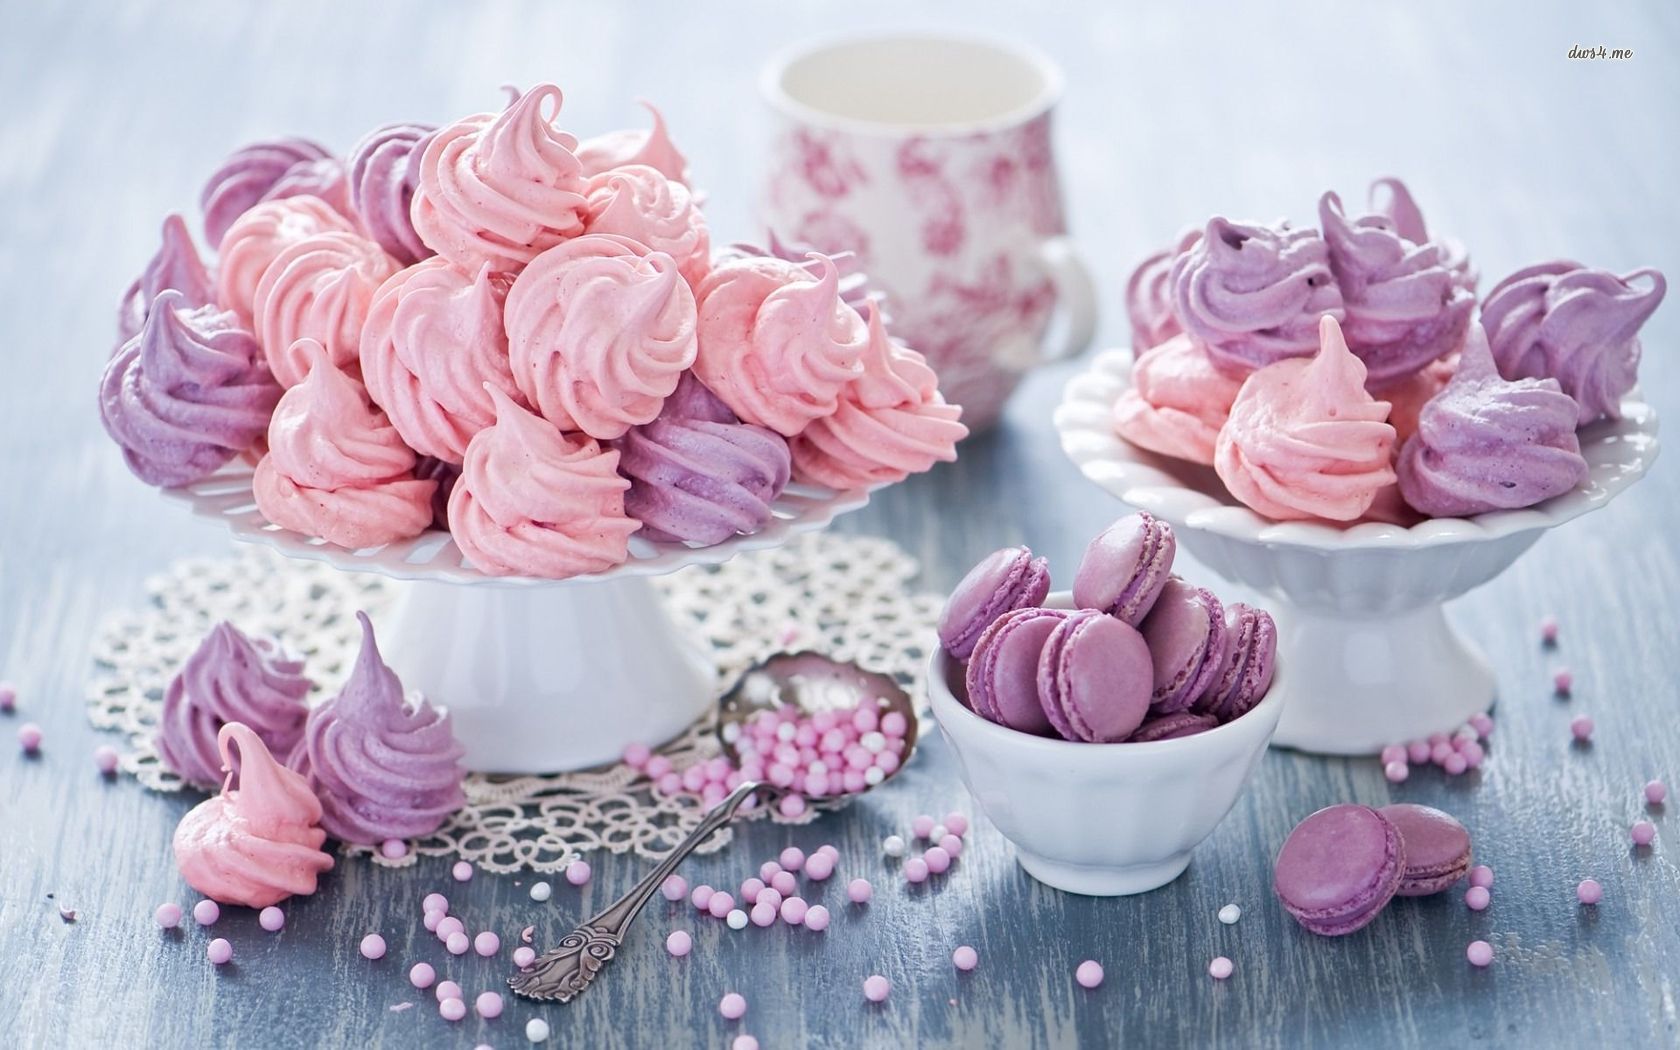 Meringues and macaroons wallpaper - Photography wallpapers